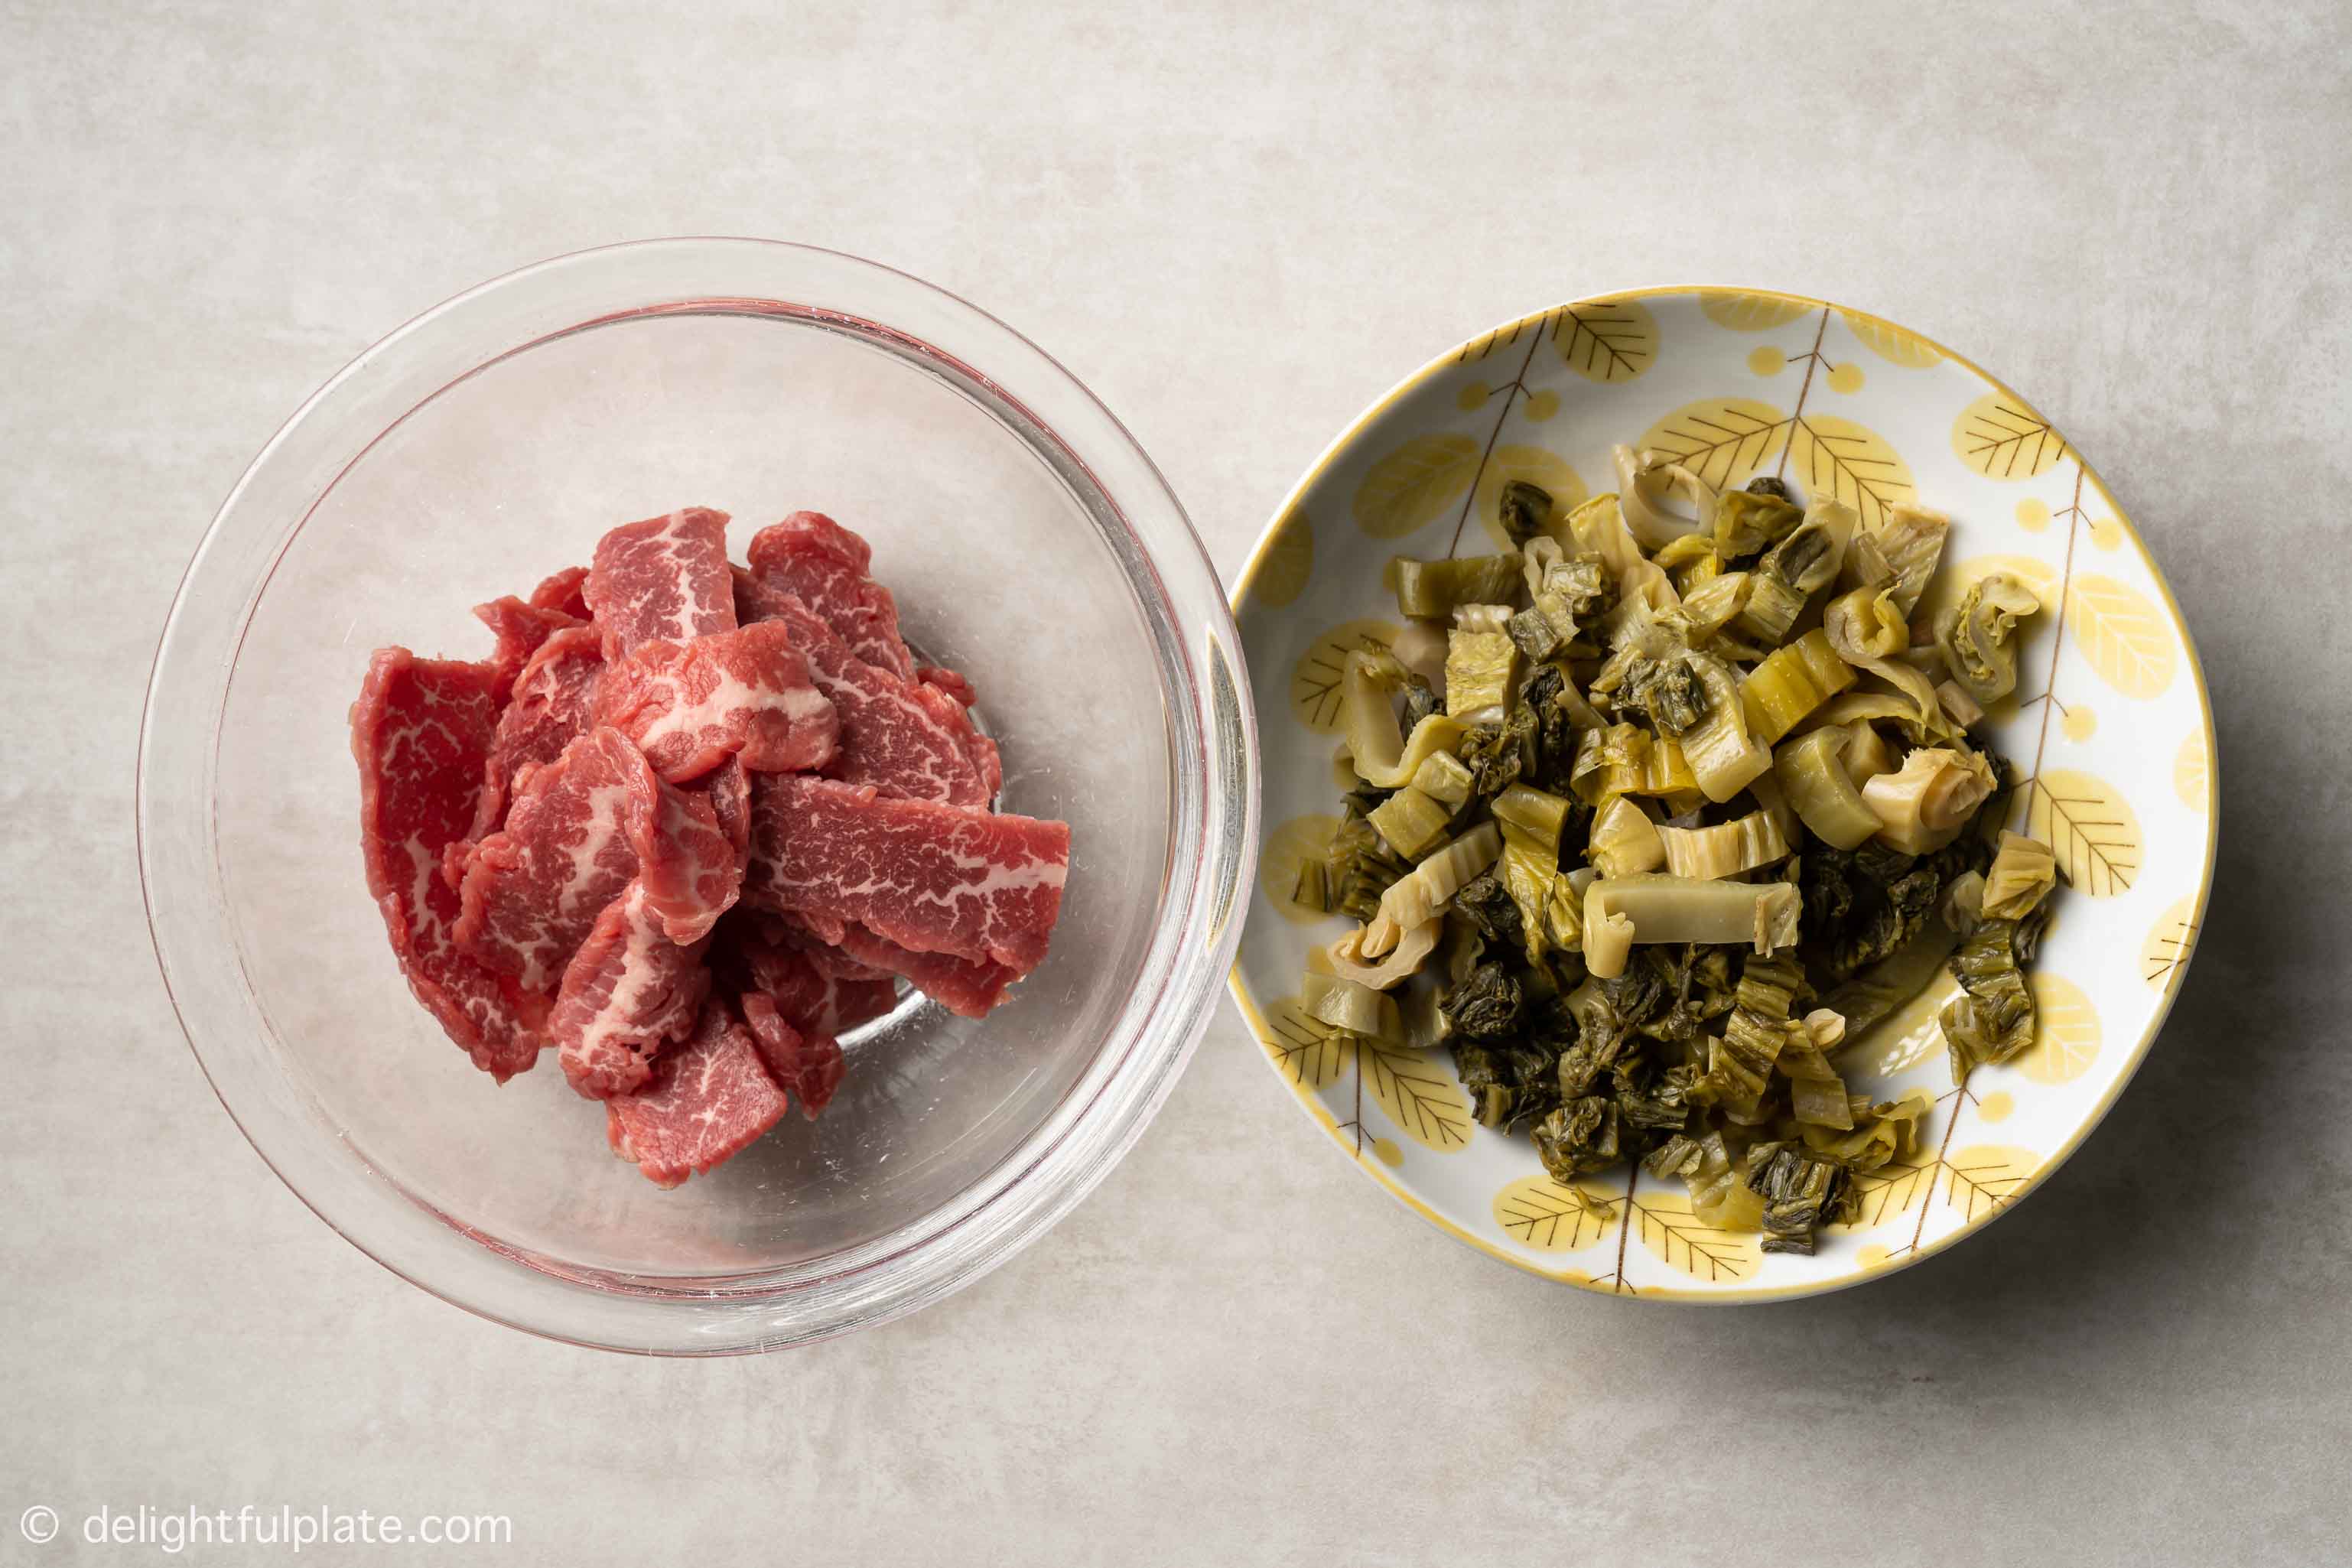 plates containing sliced beef and chopped mustard greens